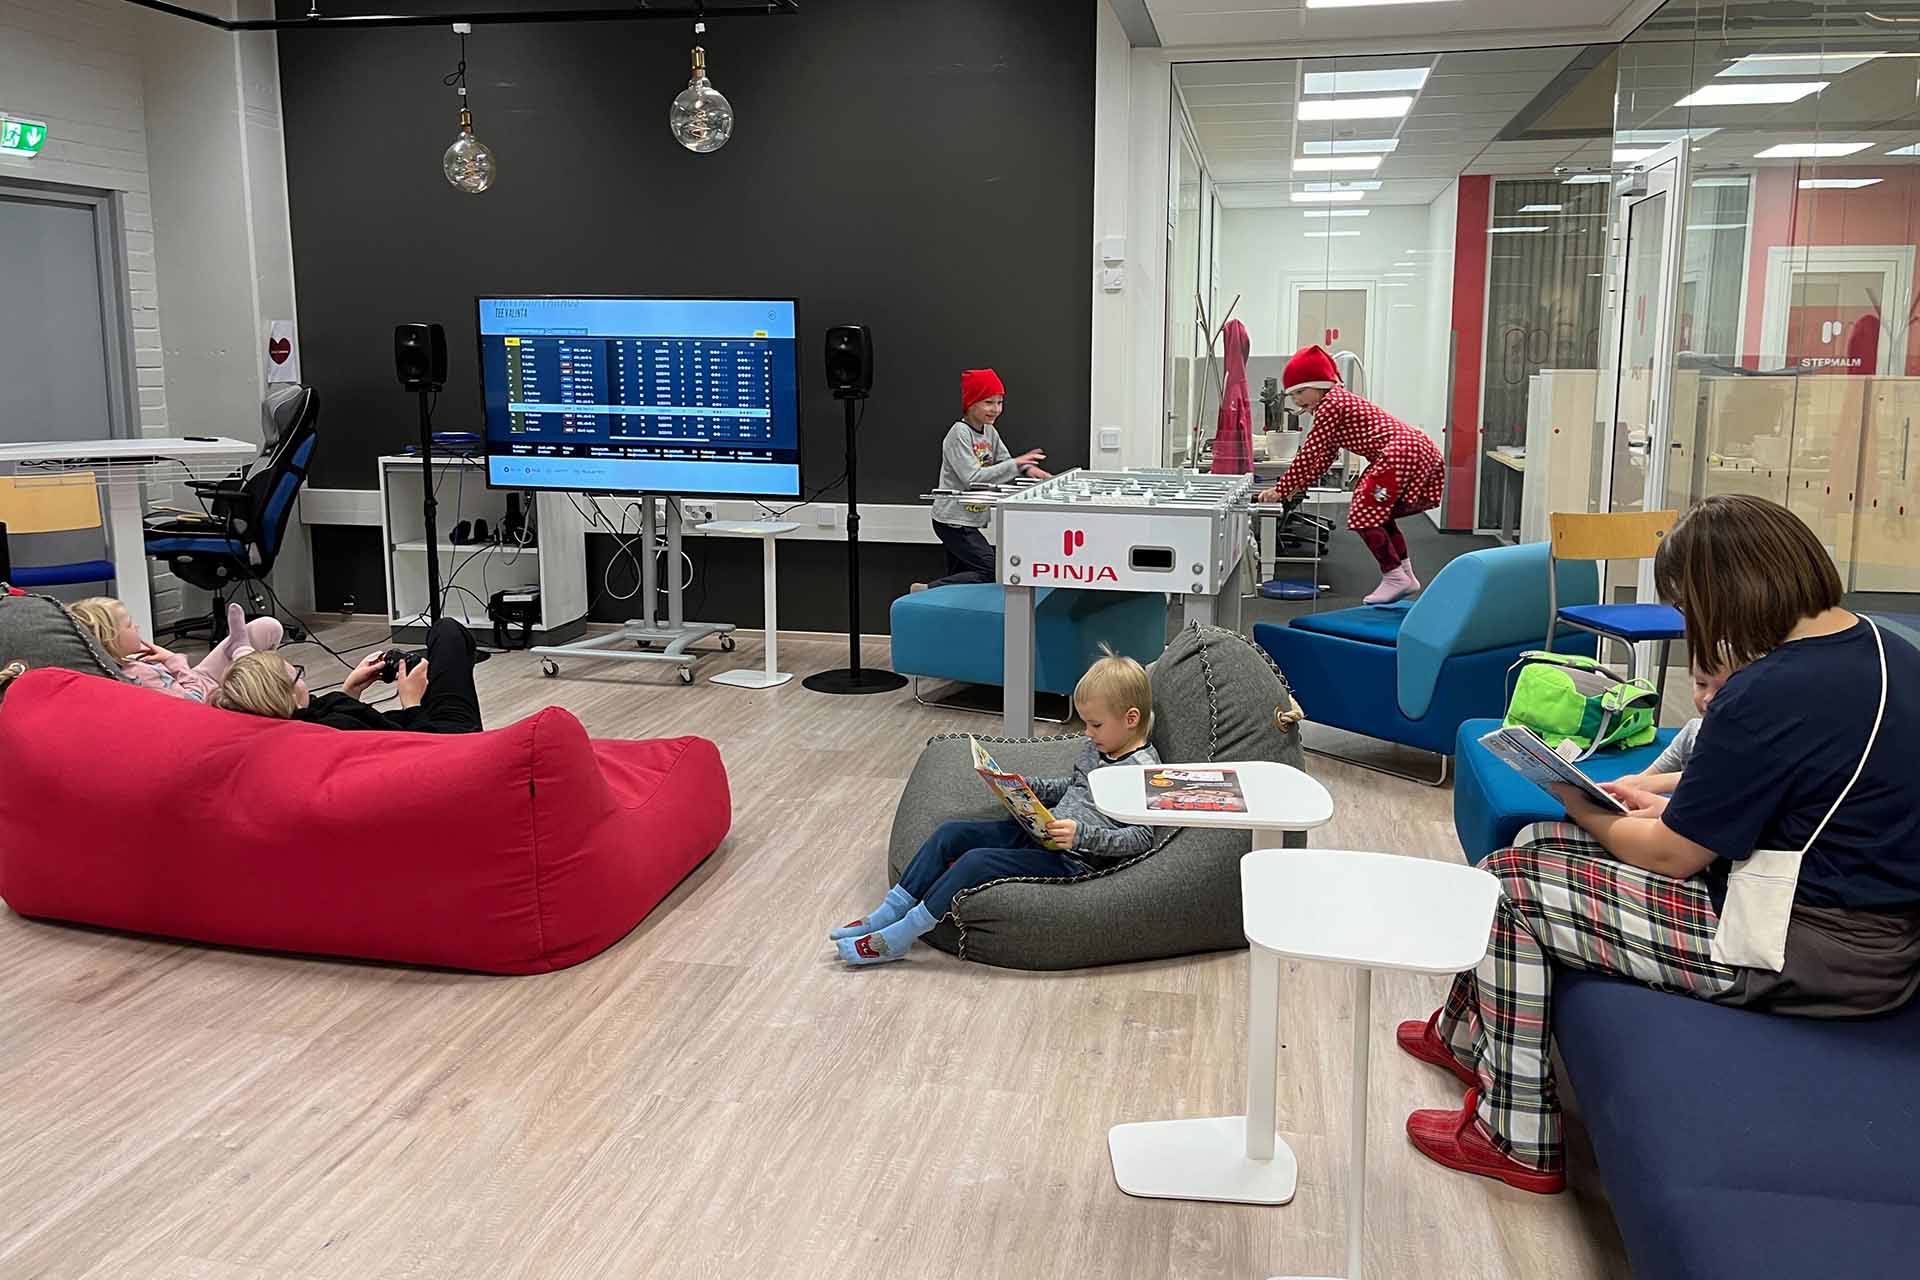 Children sitting on beanbags reading and playing in the office